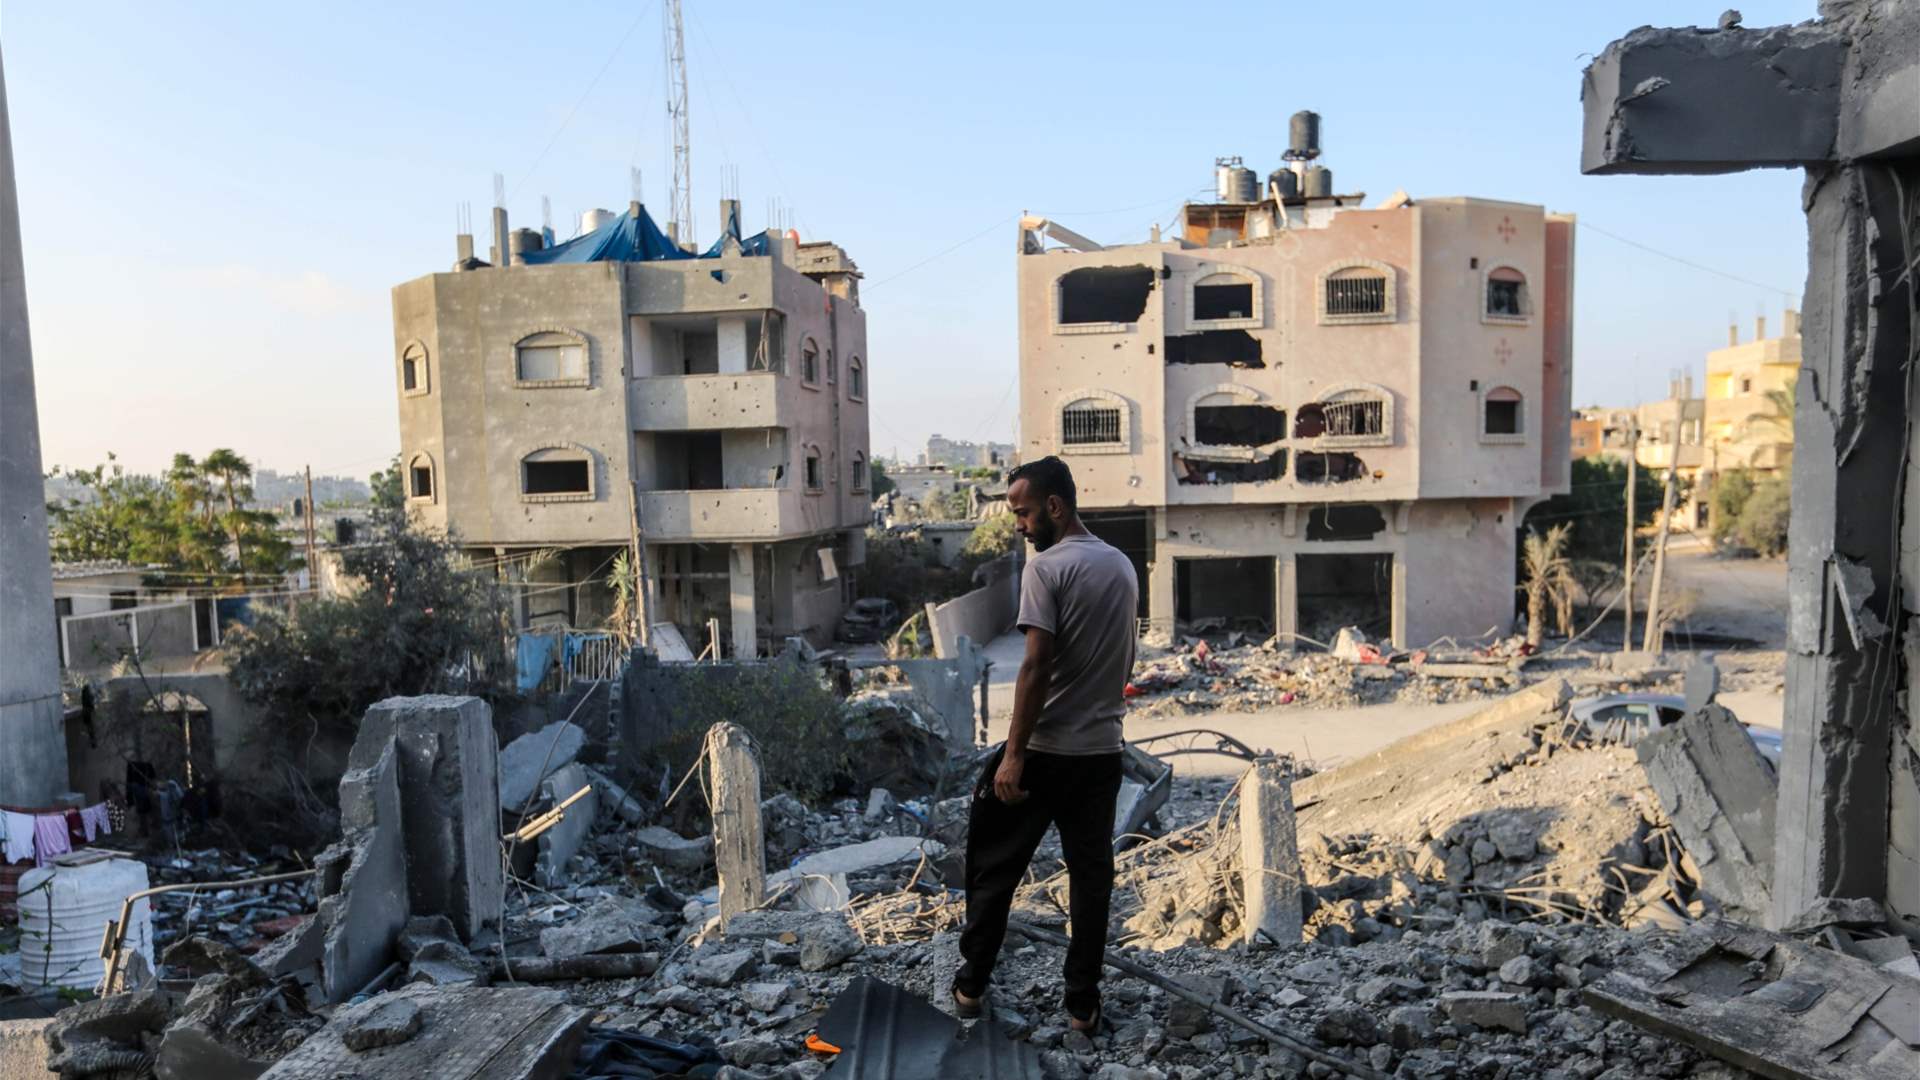 Day 132: The death toll in Gaza continues to rise due to Israeli attacks. Here is the latest update